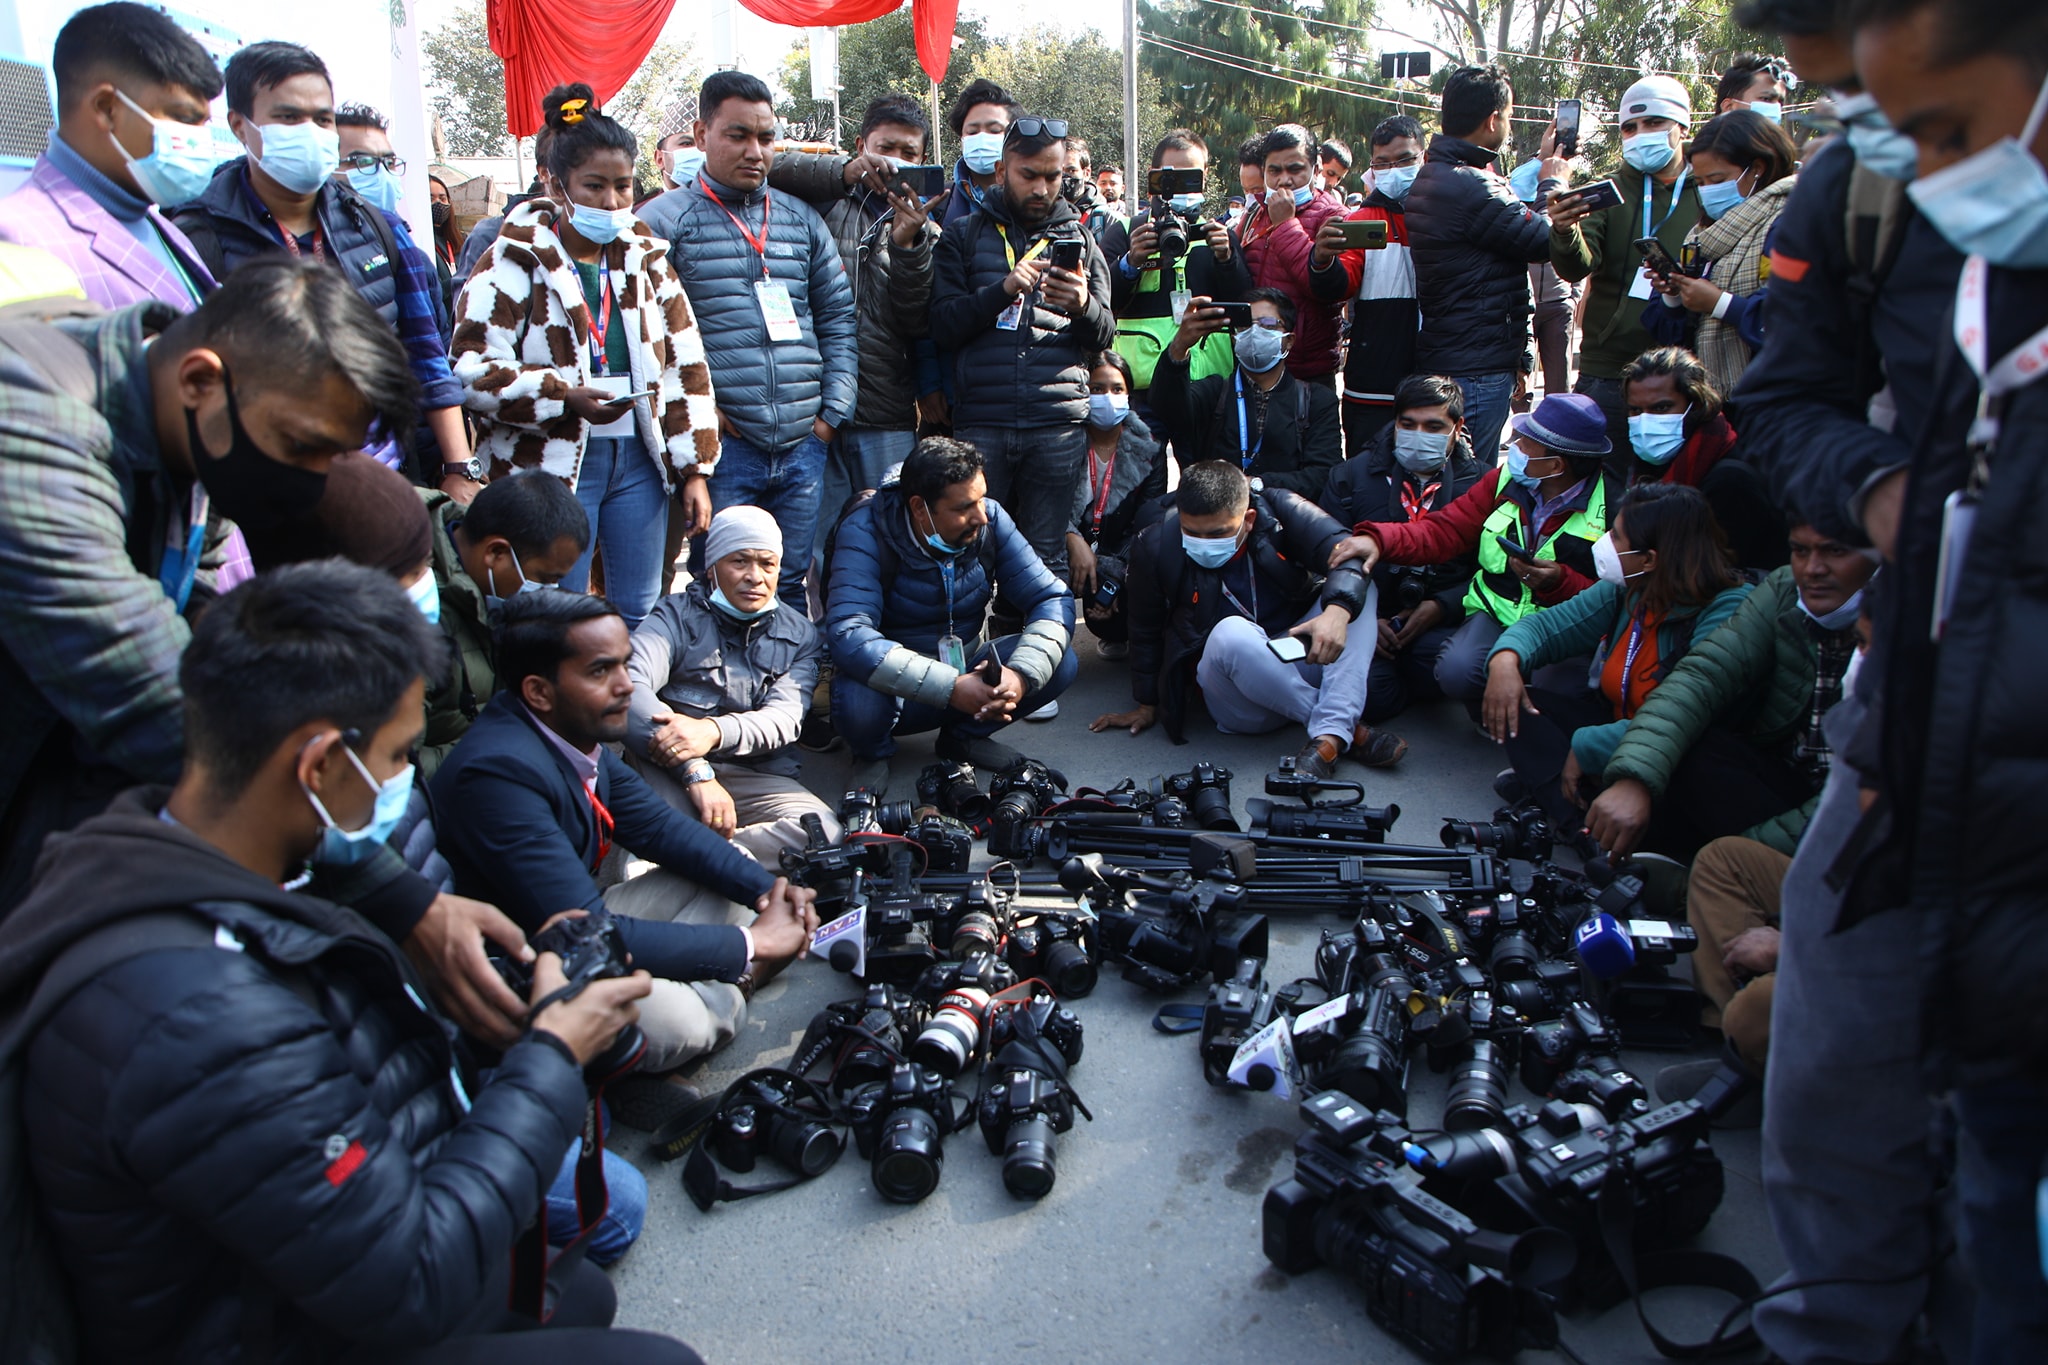 Photojournalists obstructed